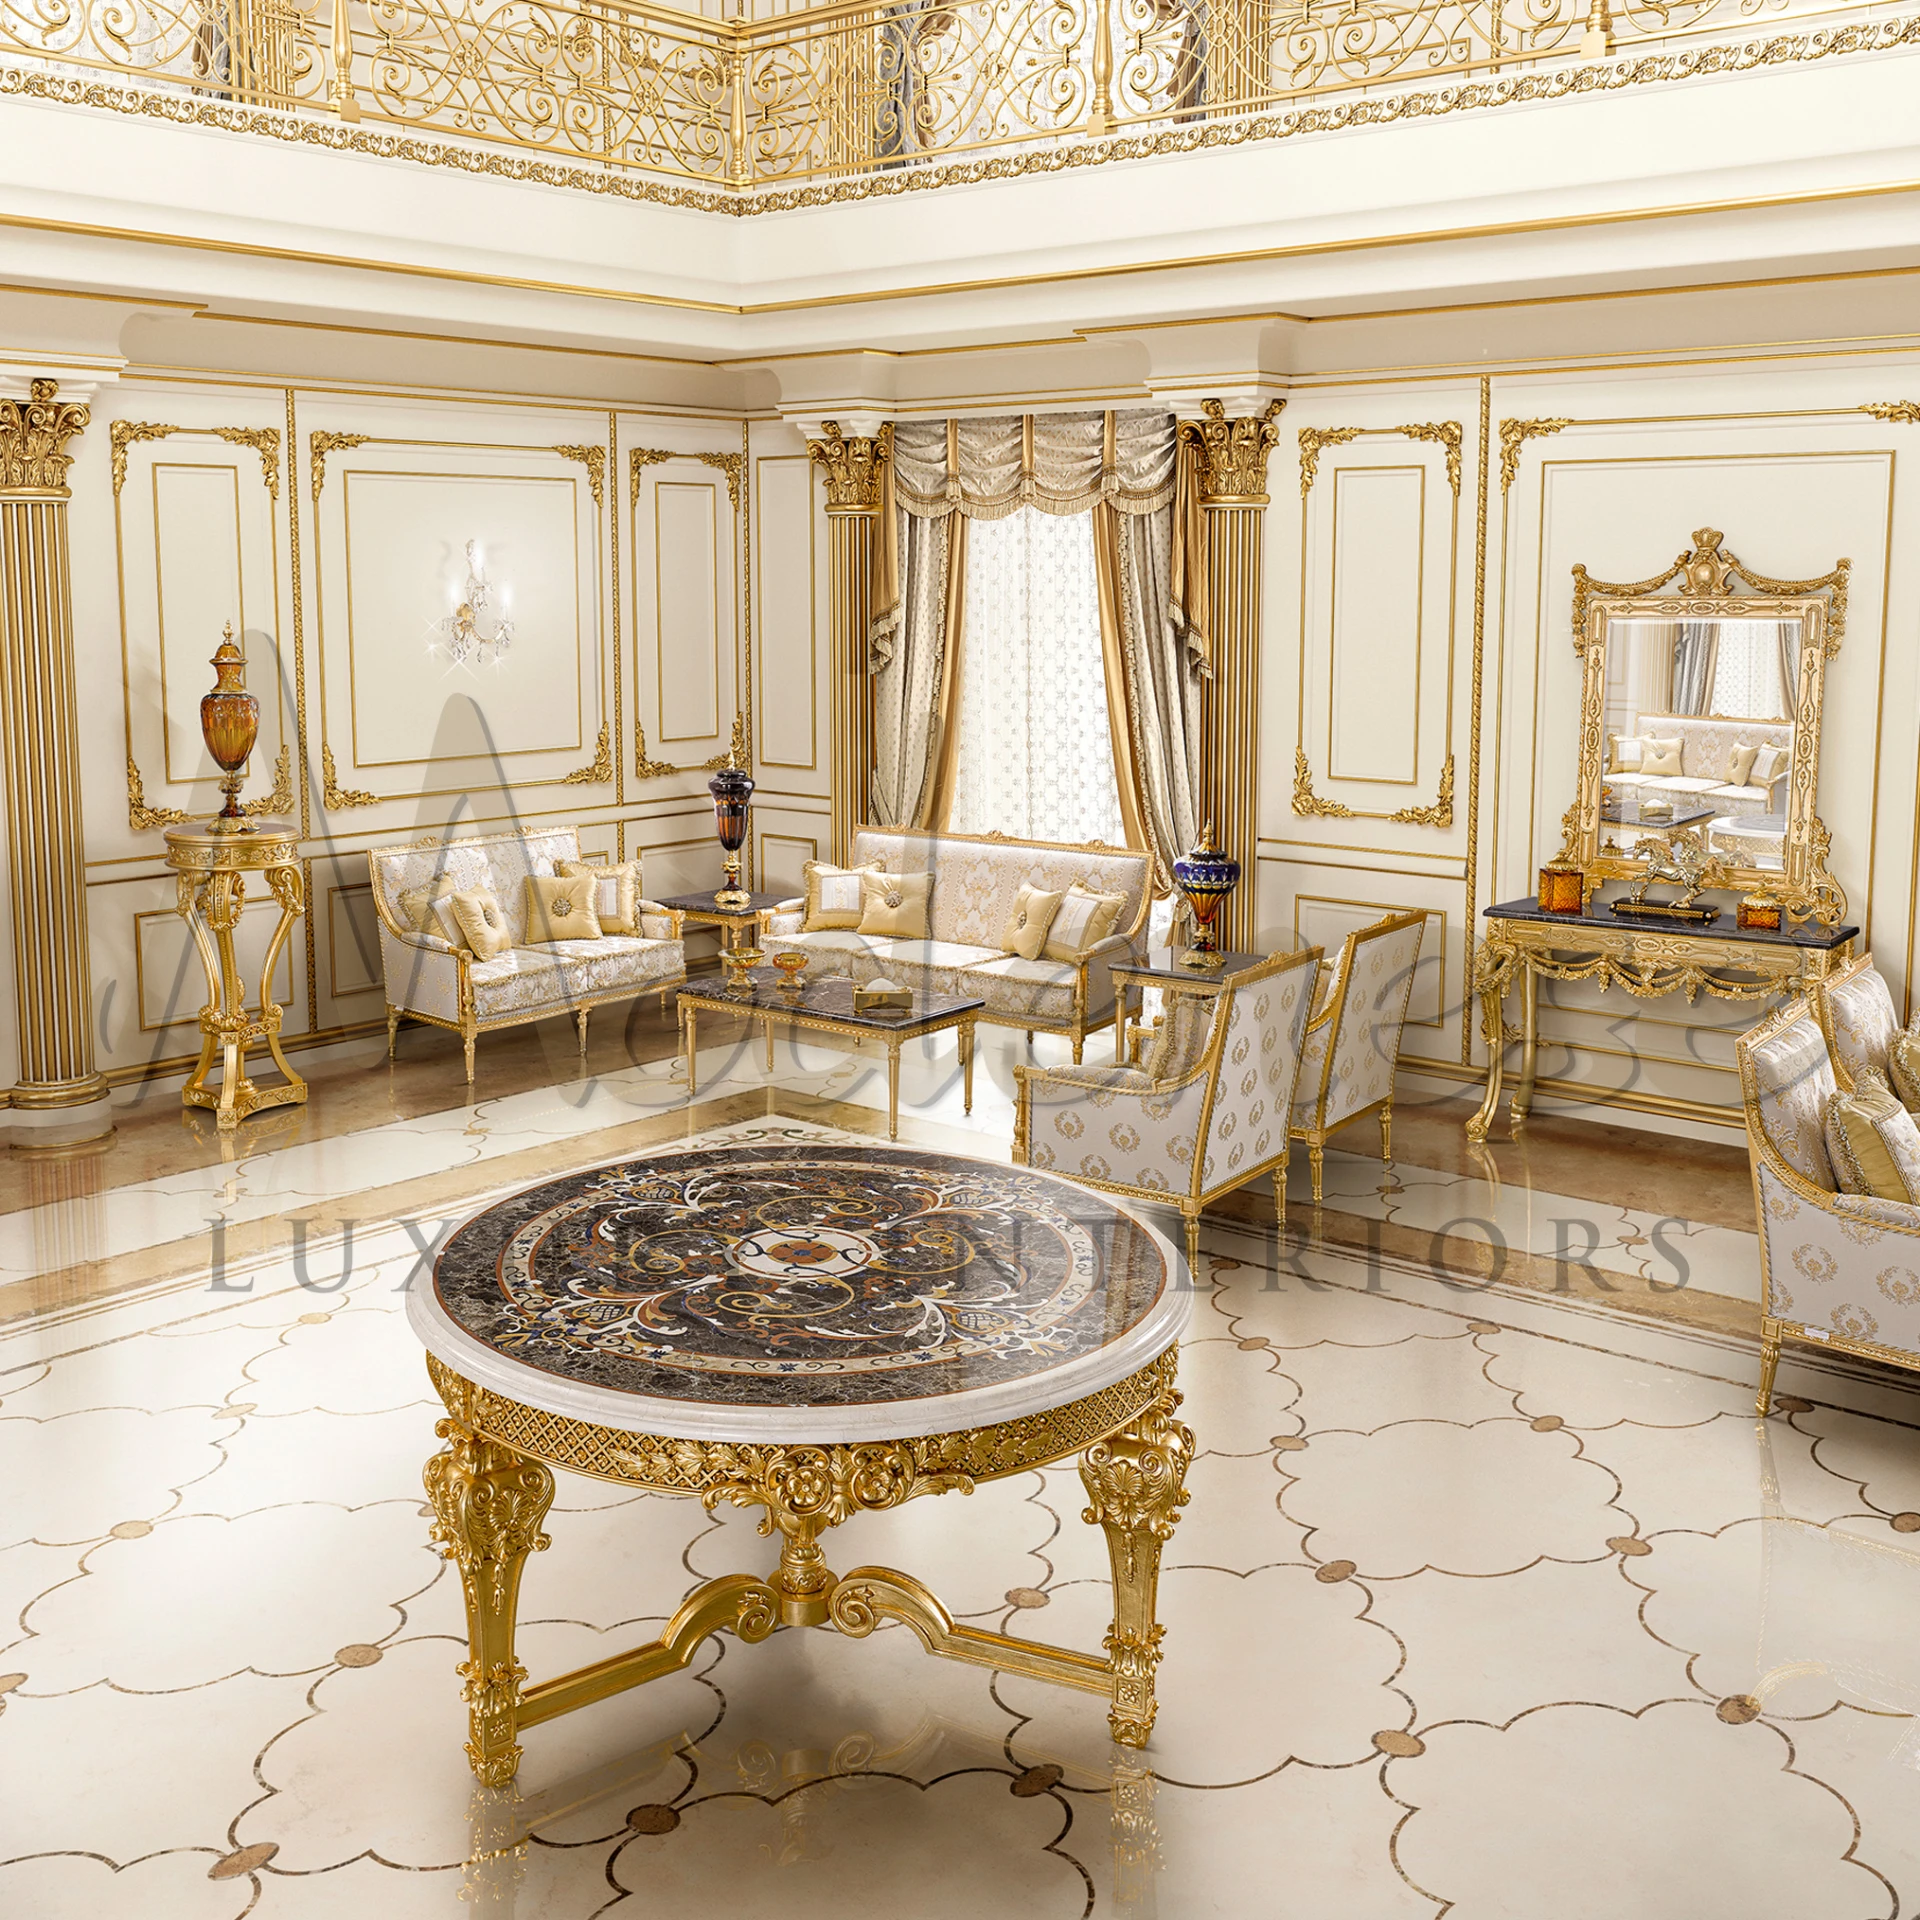 "Elegant Royal Baroque Central Table, a classical collection piece with lavish gold leaf finish and inlay marble top for opulent interiors.